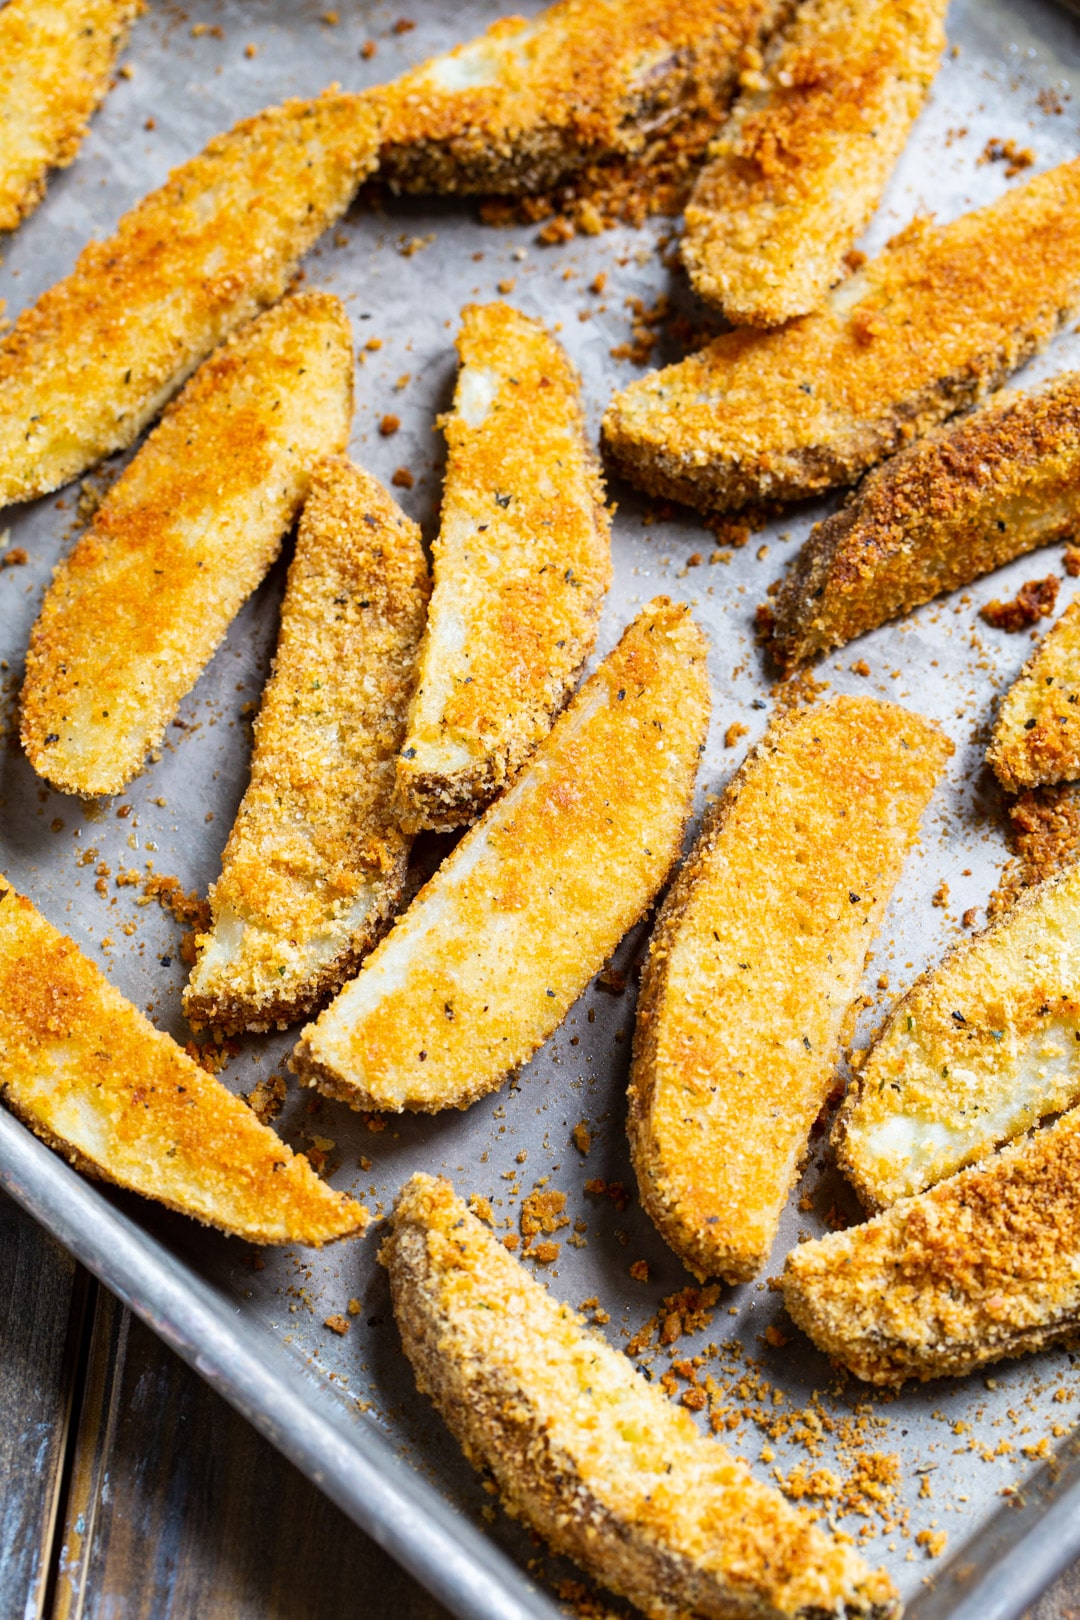 Cooked potato wedges on a baking sheet.